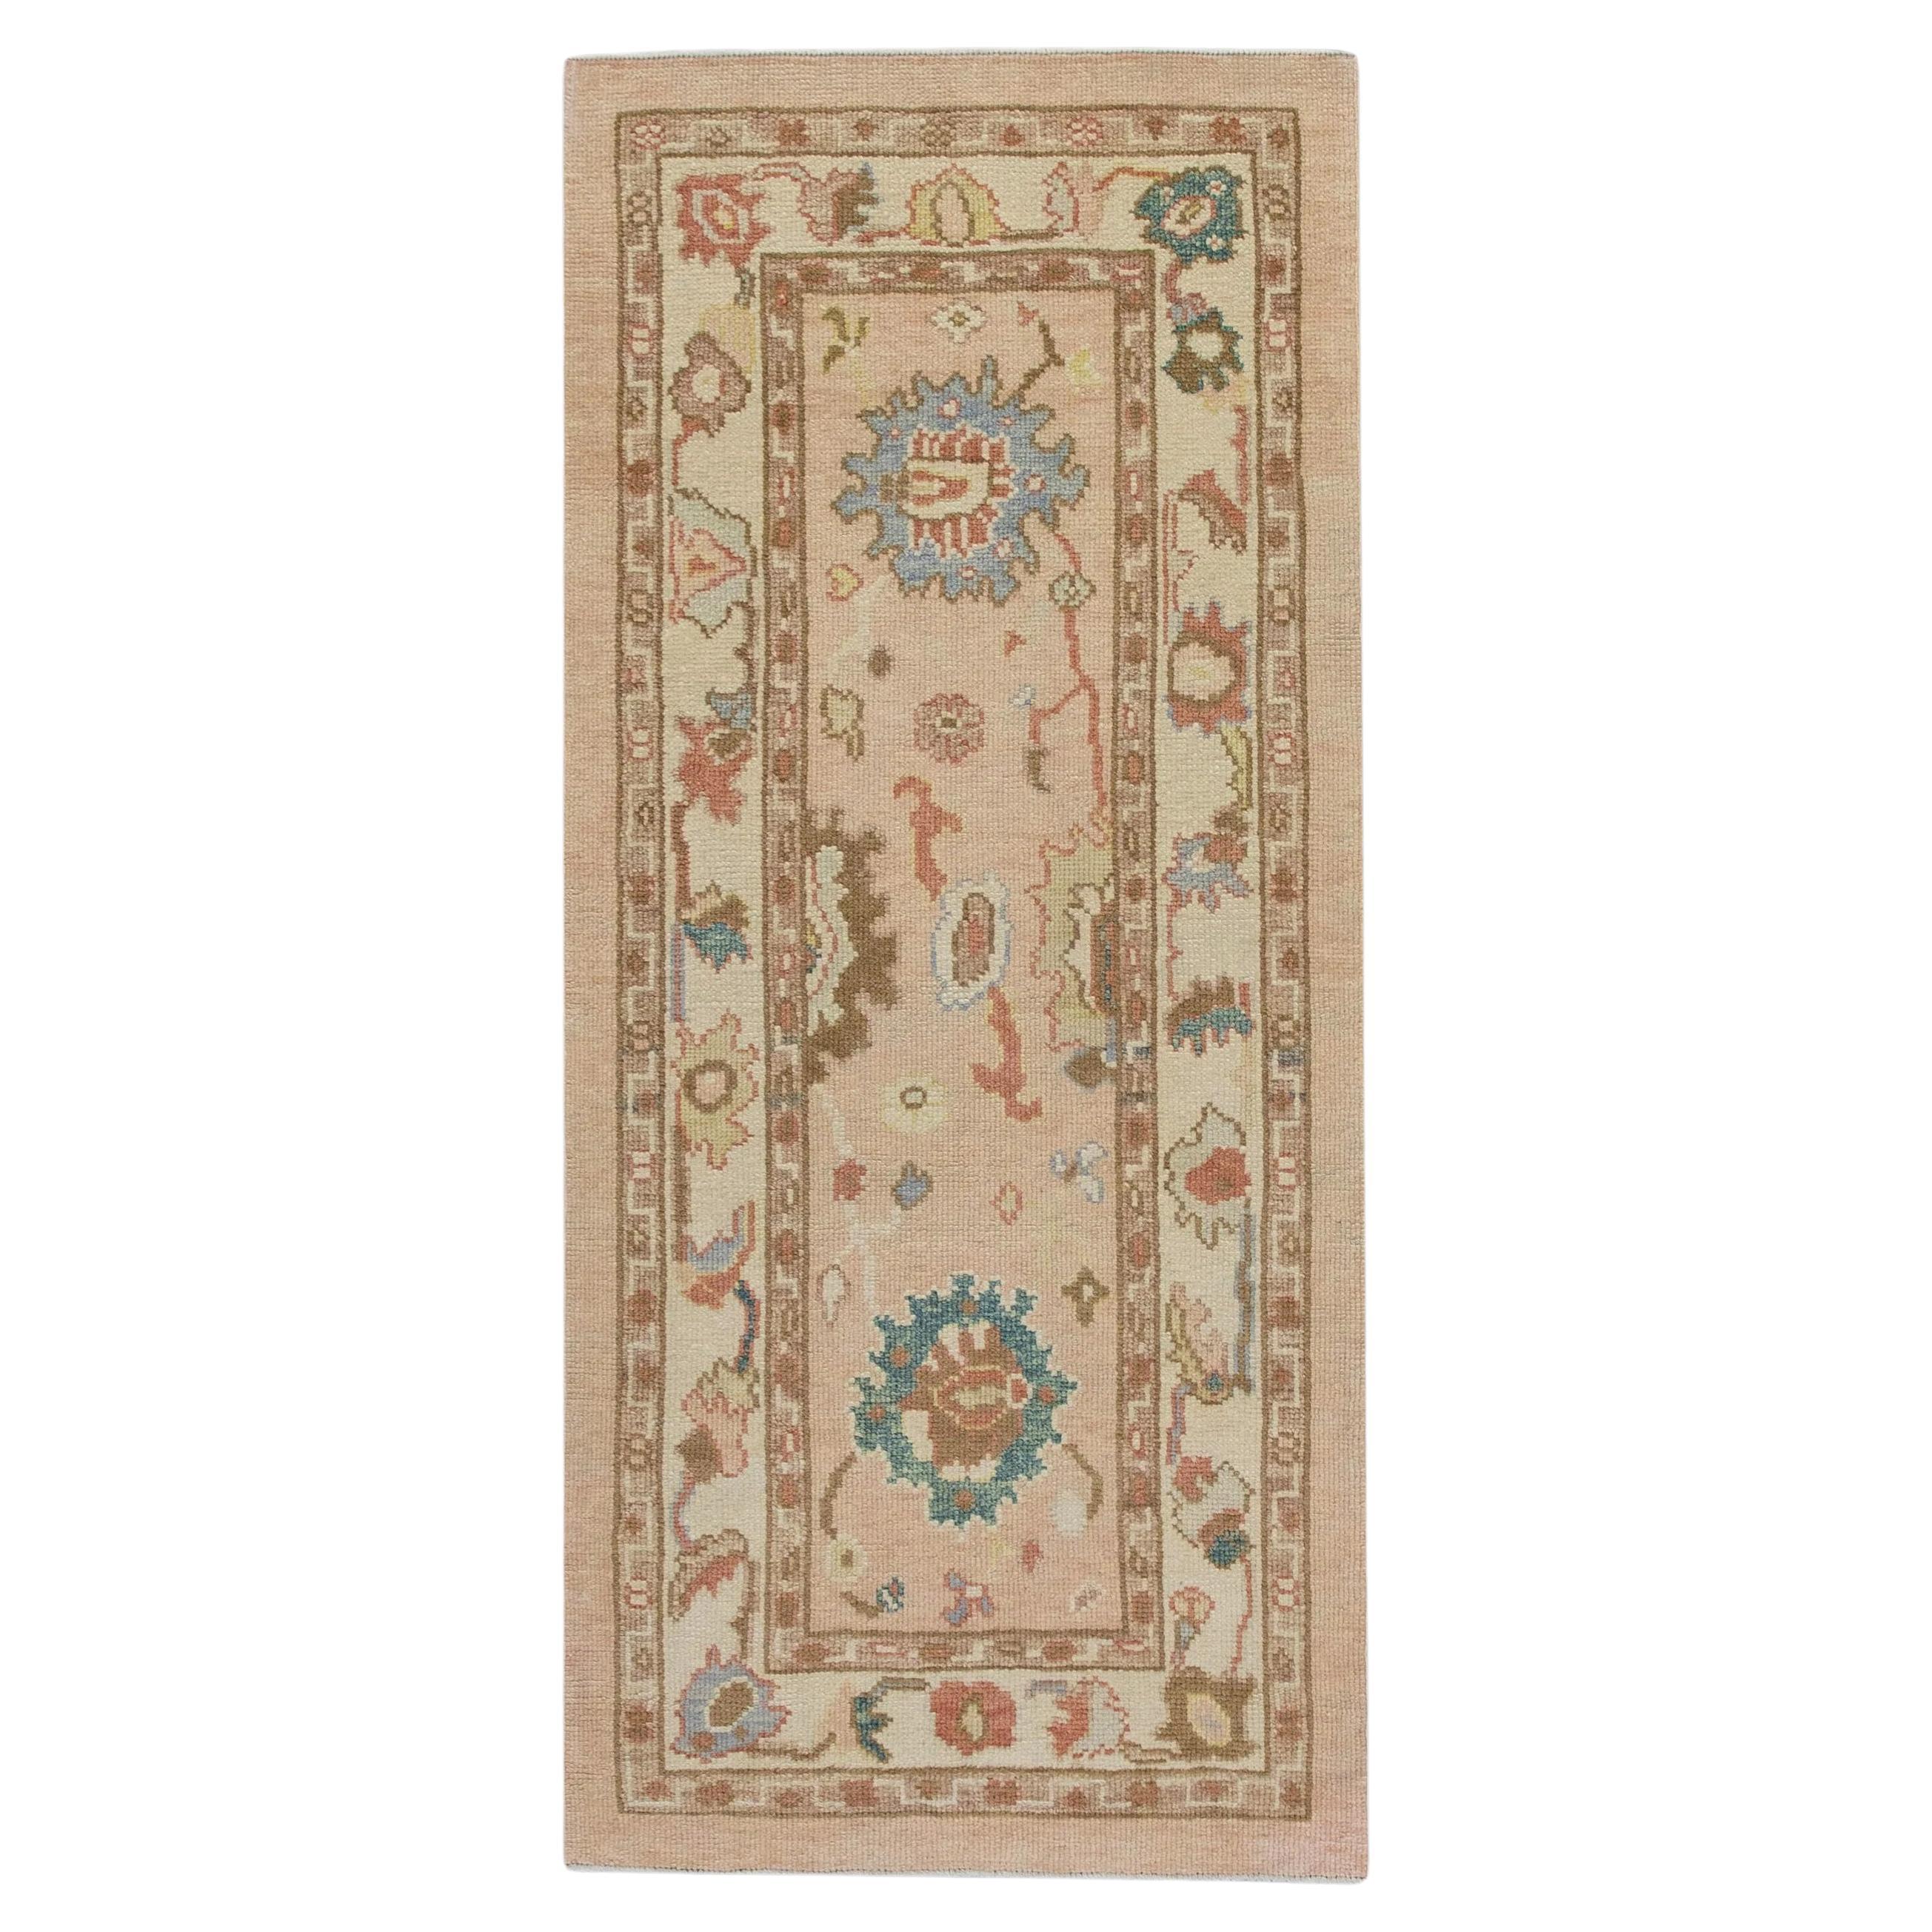 Floral Handwoven Wool Turkish Oushak Rug in Soft Pastel Pink 2'10" x 6'3"